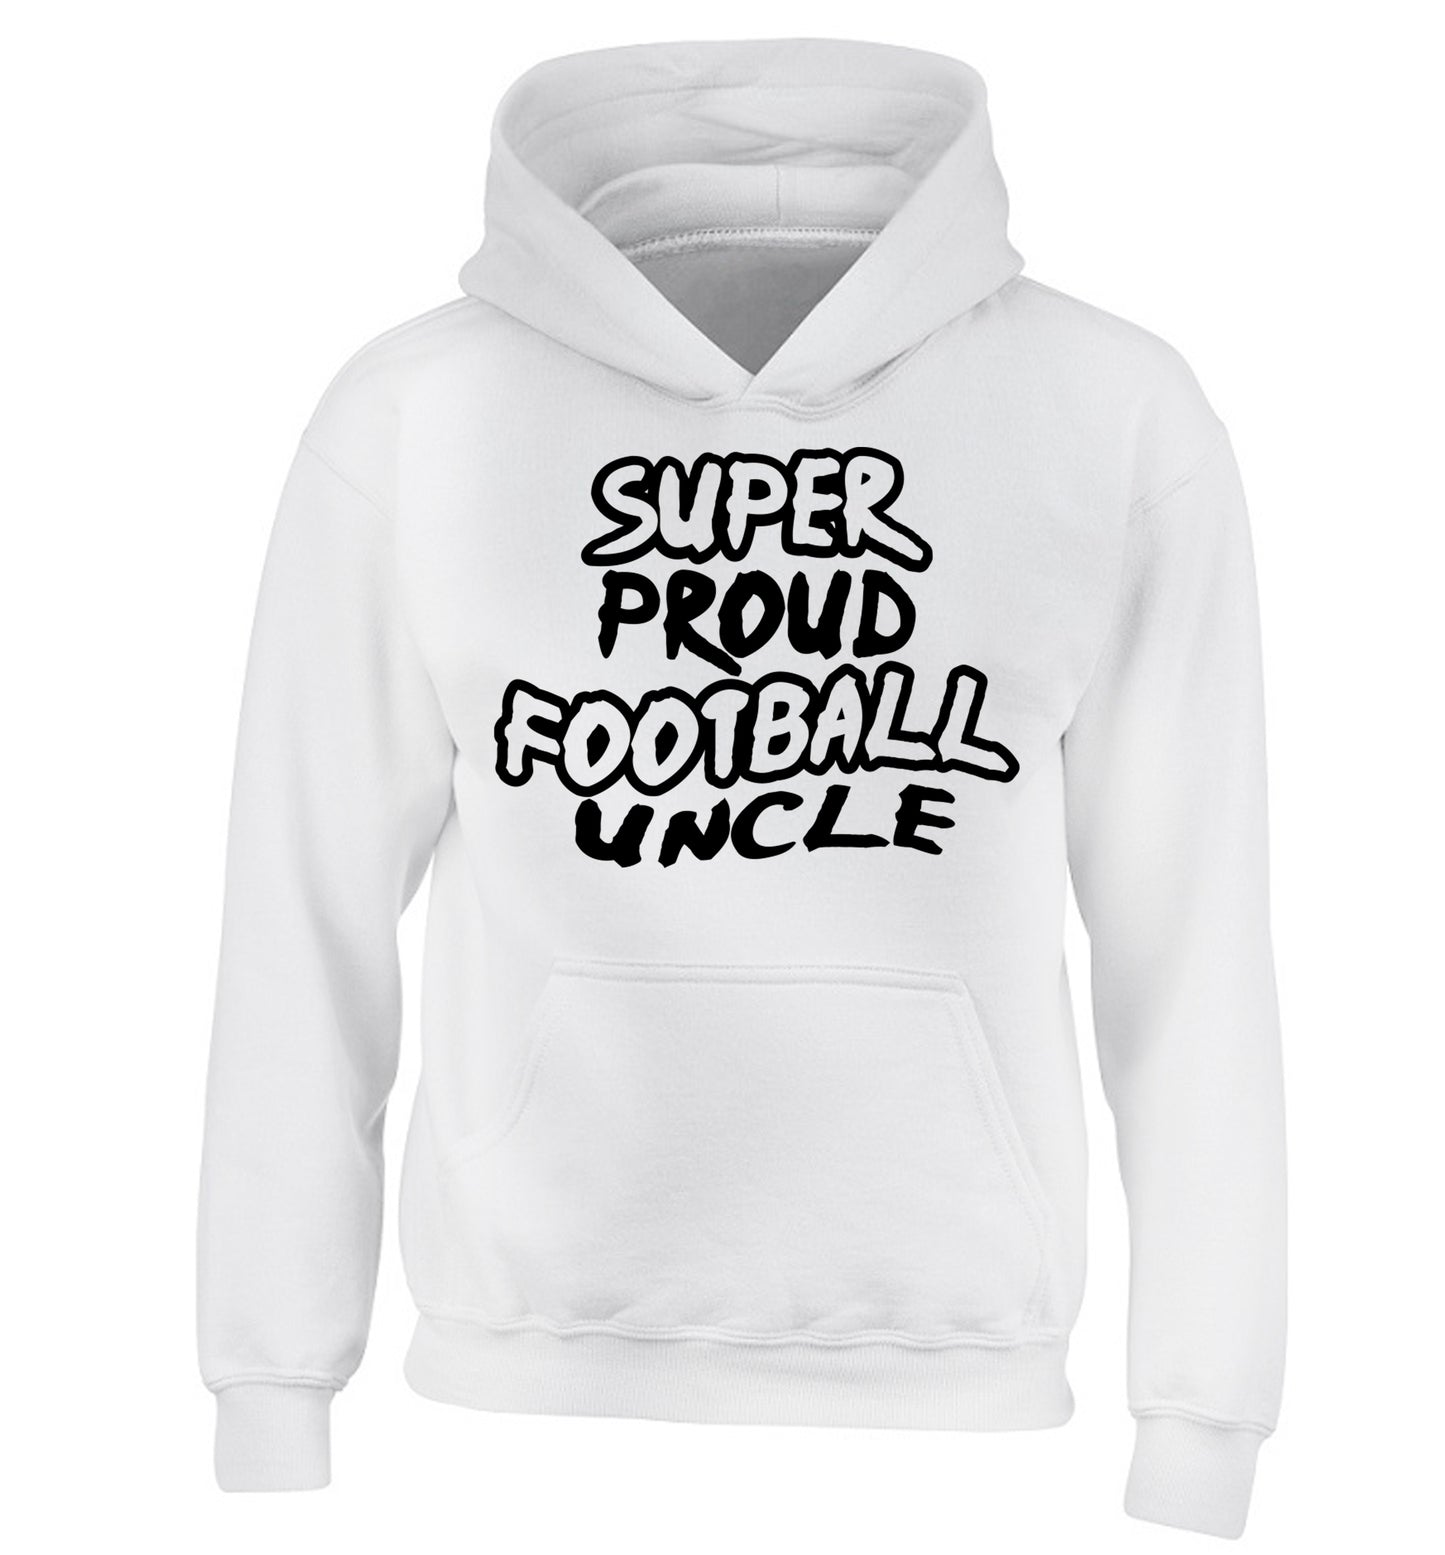 Super proud football uncle children's white hoodie 12-14 Years